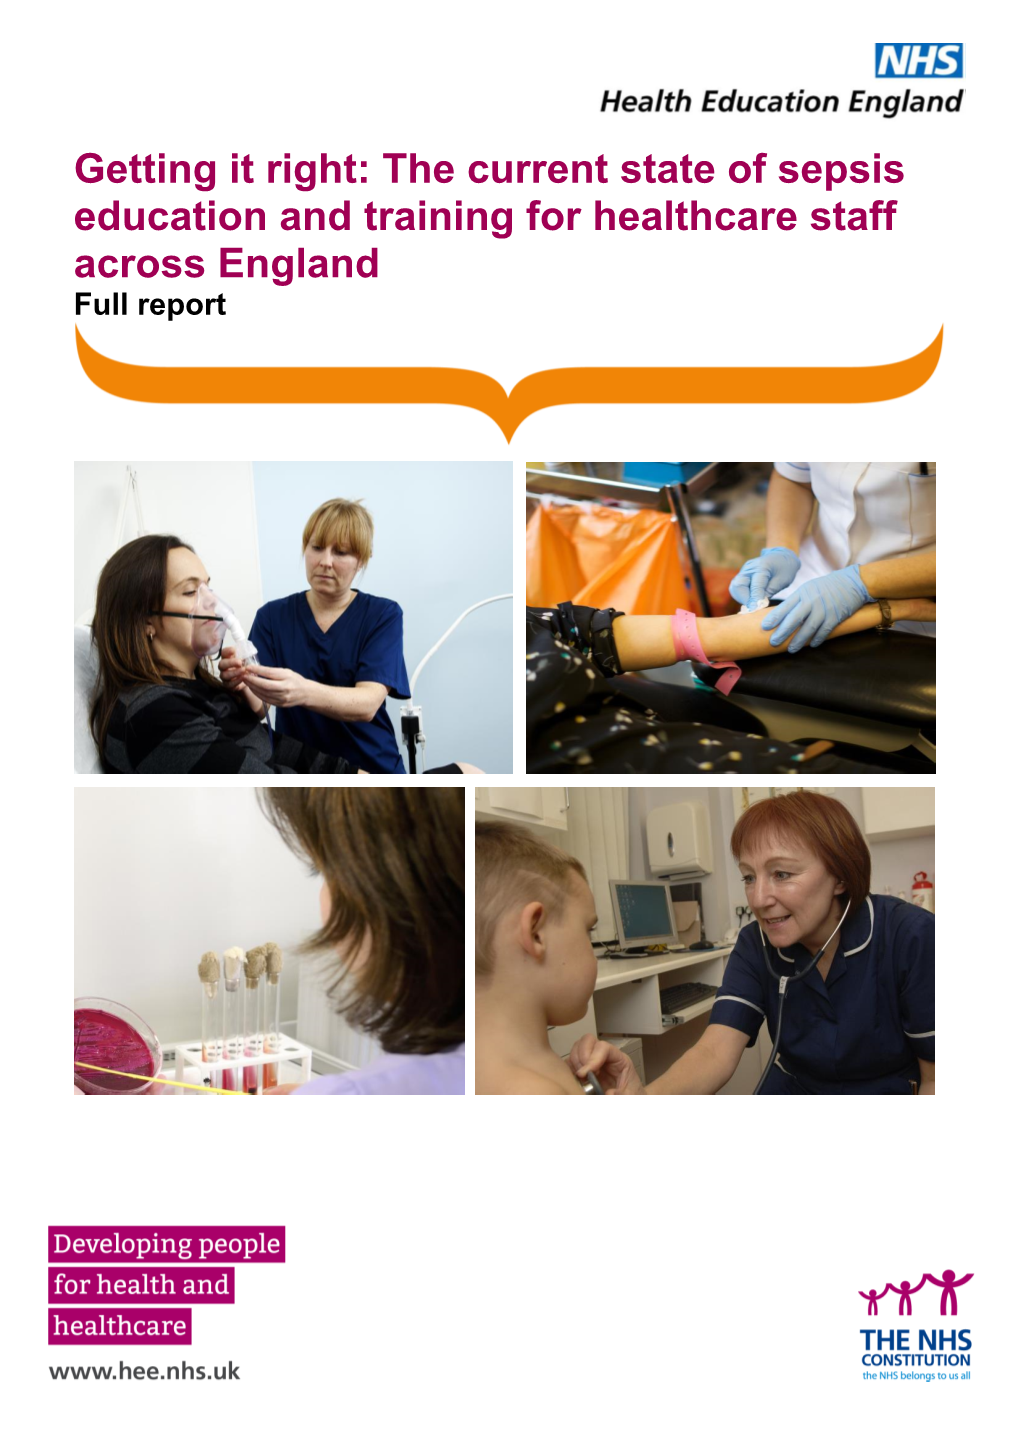 The Current State of Sepsis Education and Training for Healthcare Staff Across England Full Report